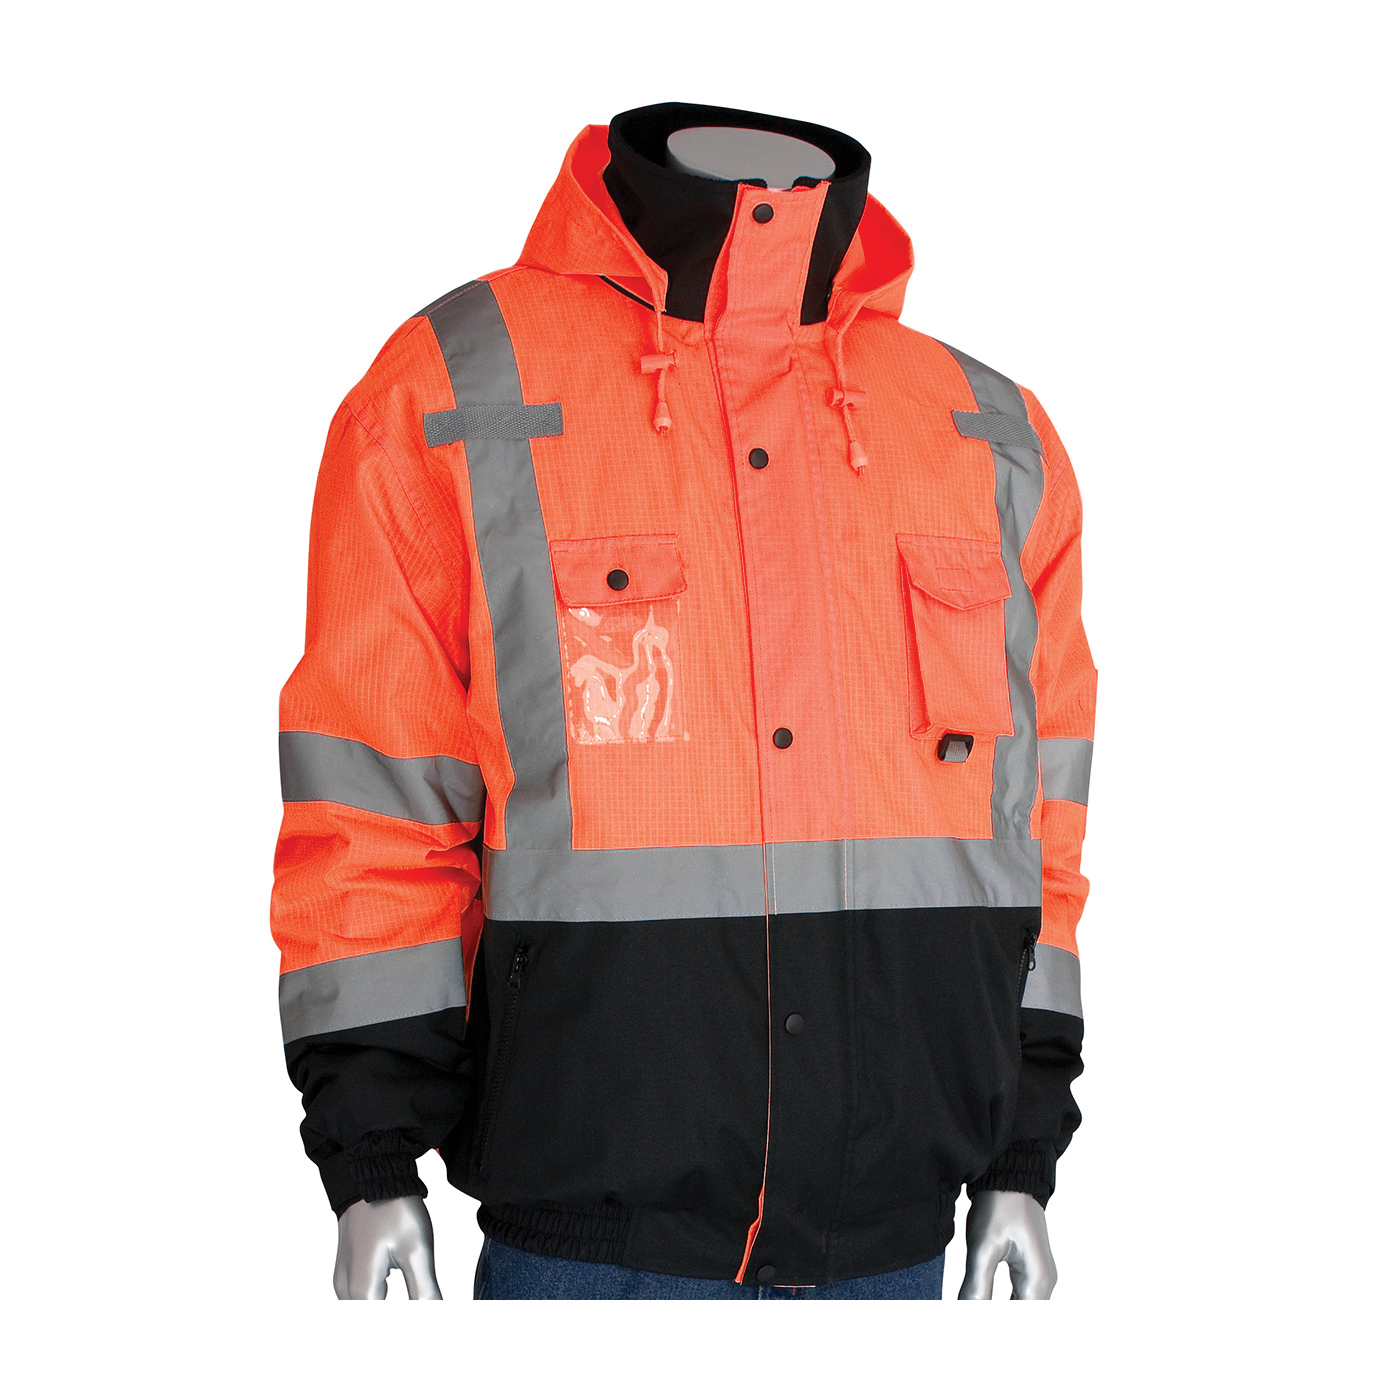 PIP® 333-1770-OR/M Bomber Jacket With Zip-Out Fleece Liner, Hi-Viz Orange, Polyester, 54 in Chest, Resists: Water, Specifications Met: ANSI 107 Class 3 Type R